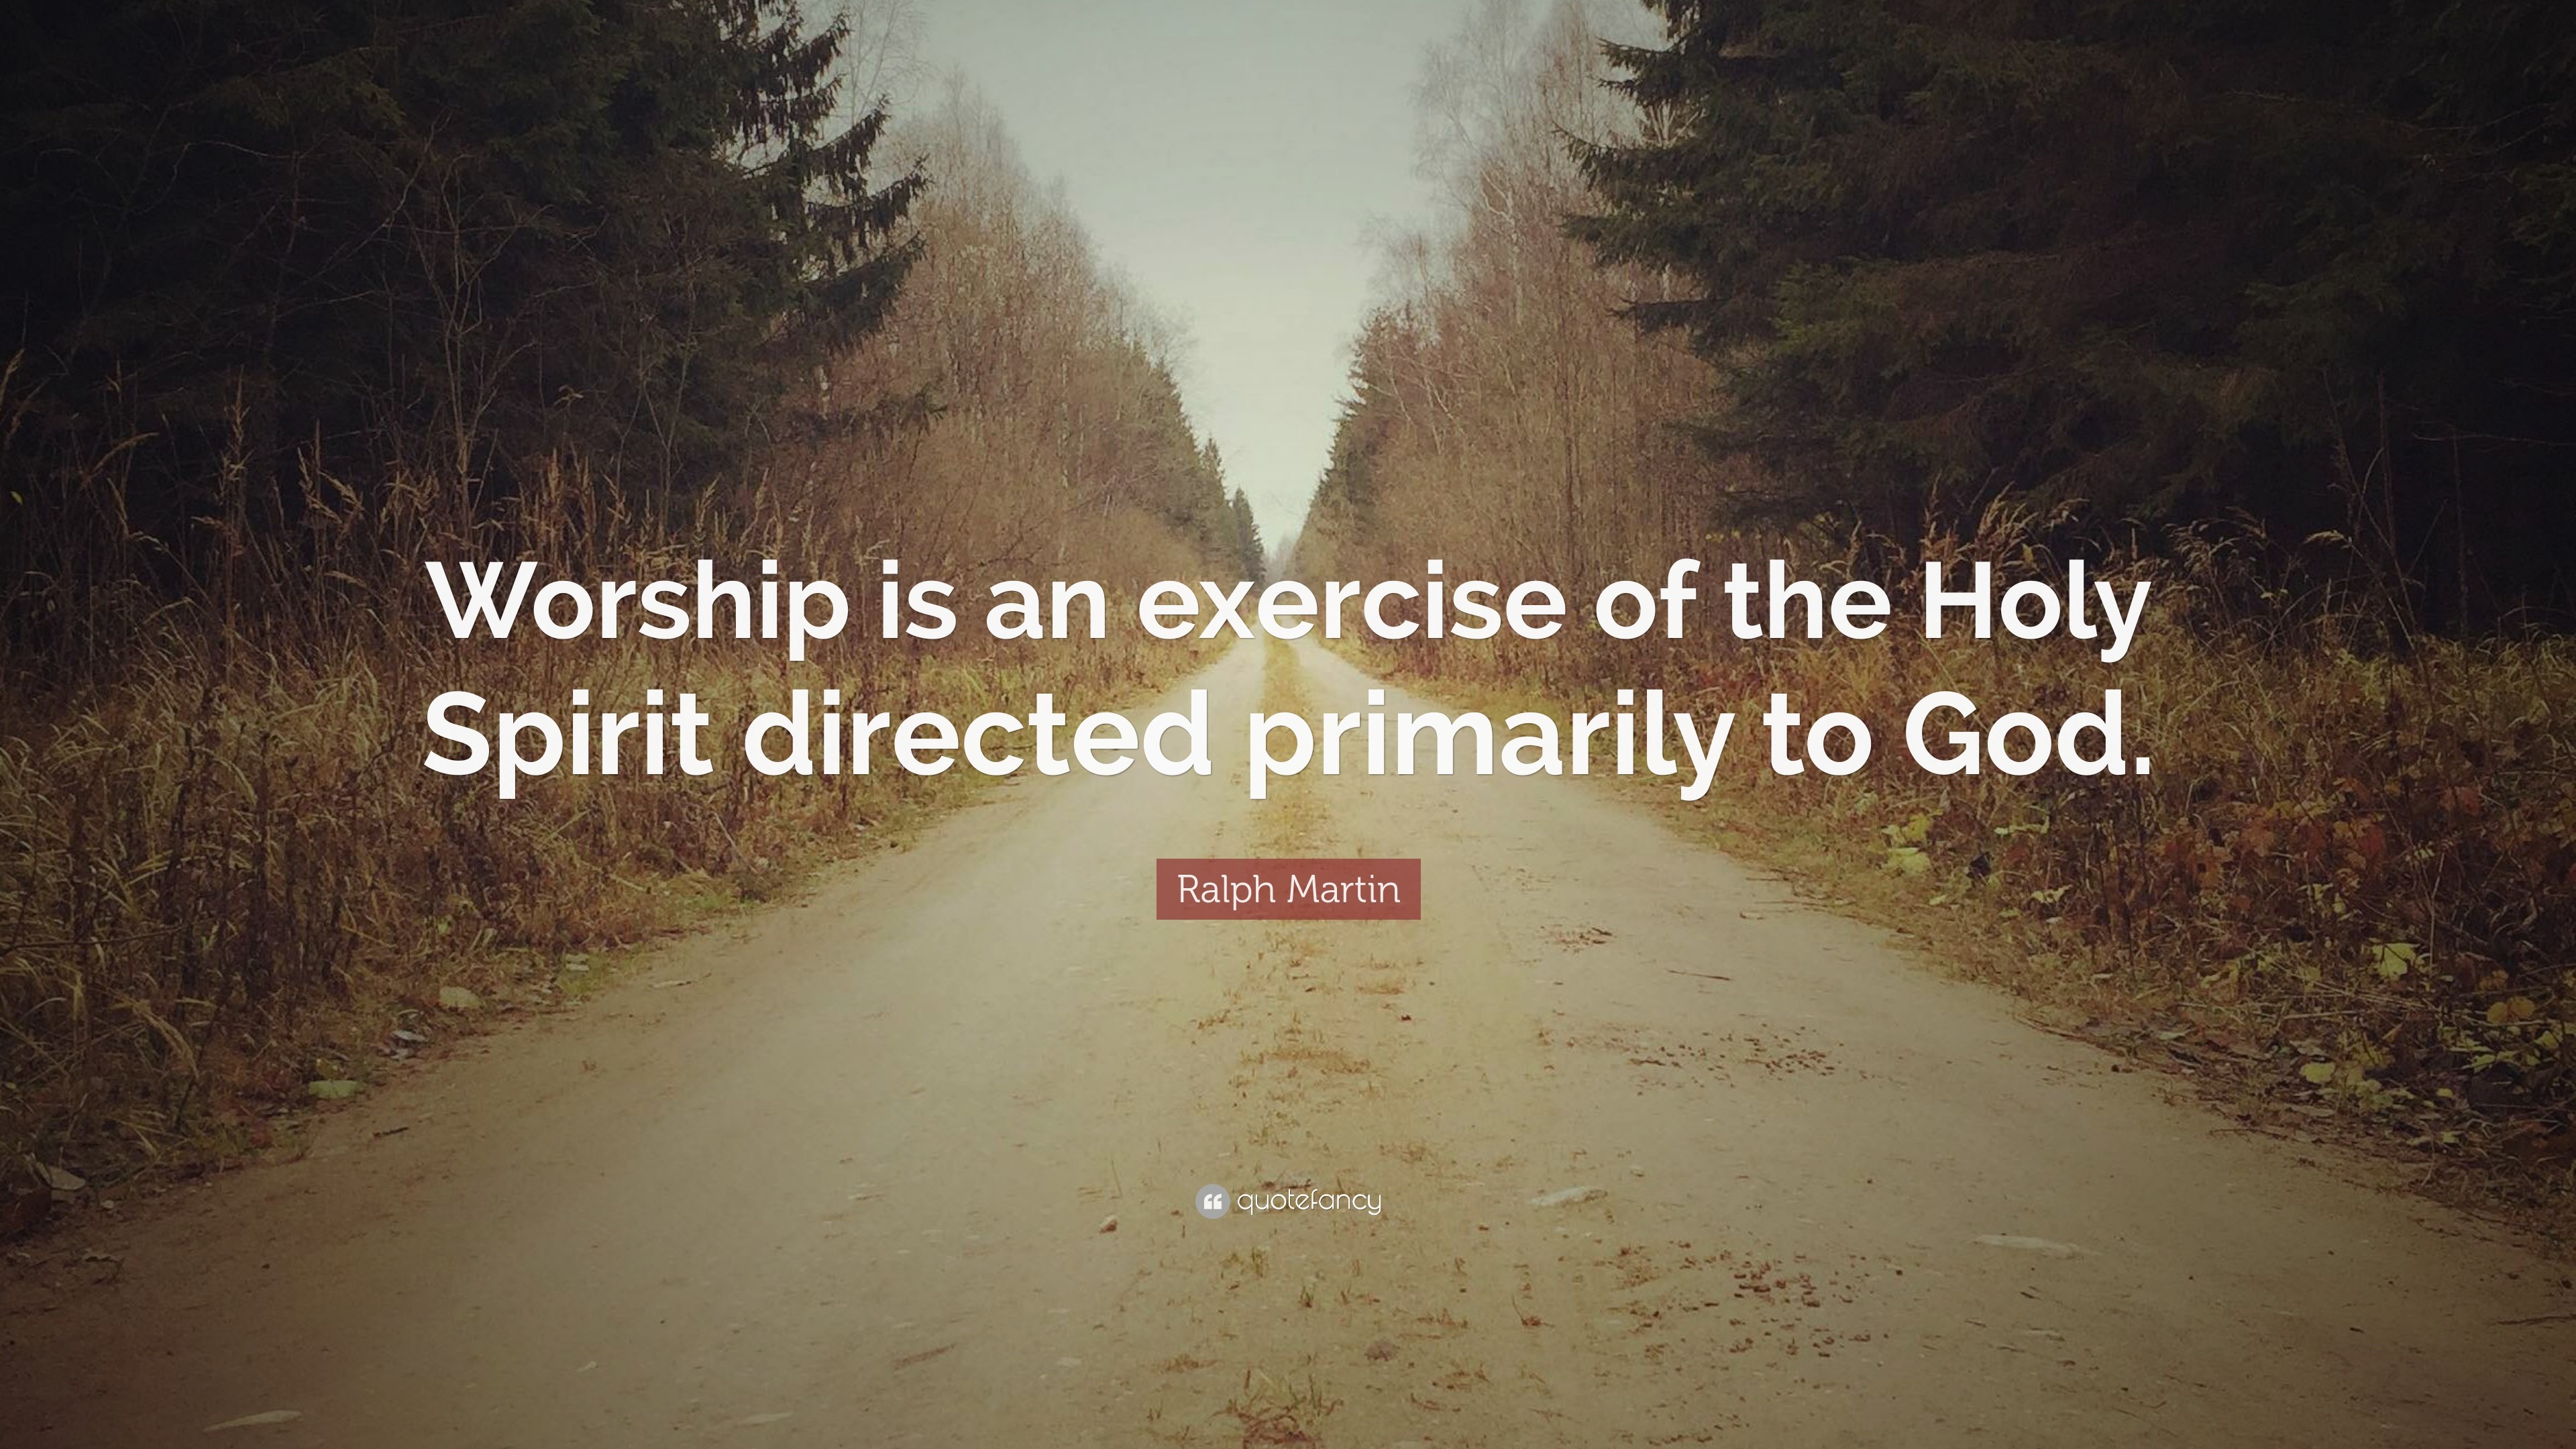 3840x2160 Ralph Martin Quote: “Worship is an exercise of the Holy Spirit directed  primarily to